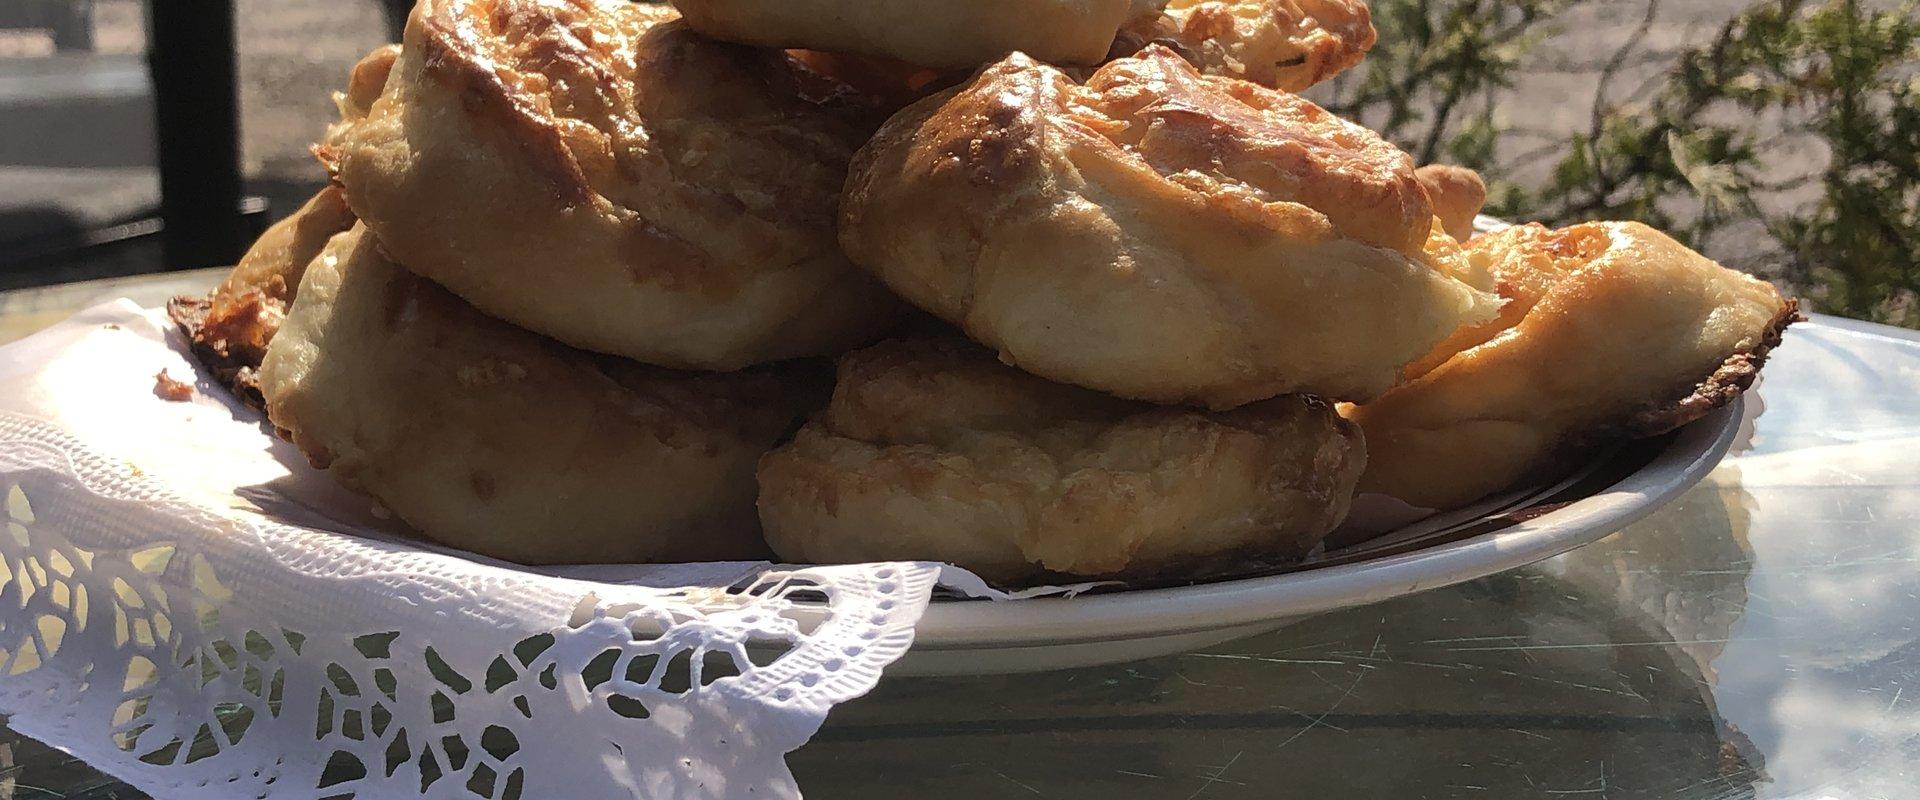 You can taste homemade pastries at Emmaste Tea House